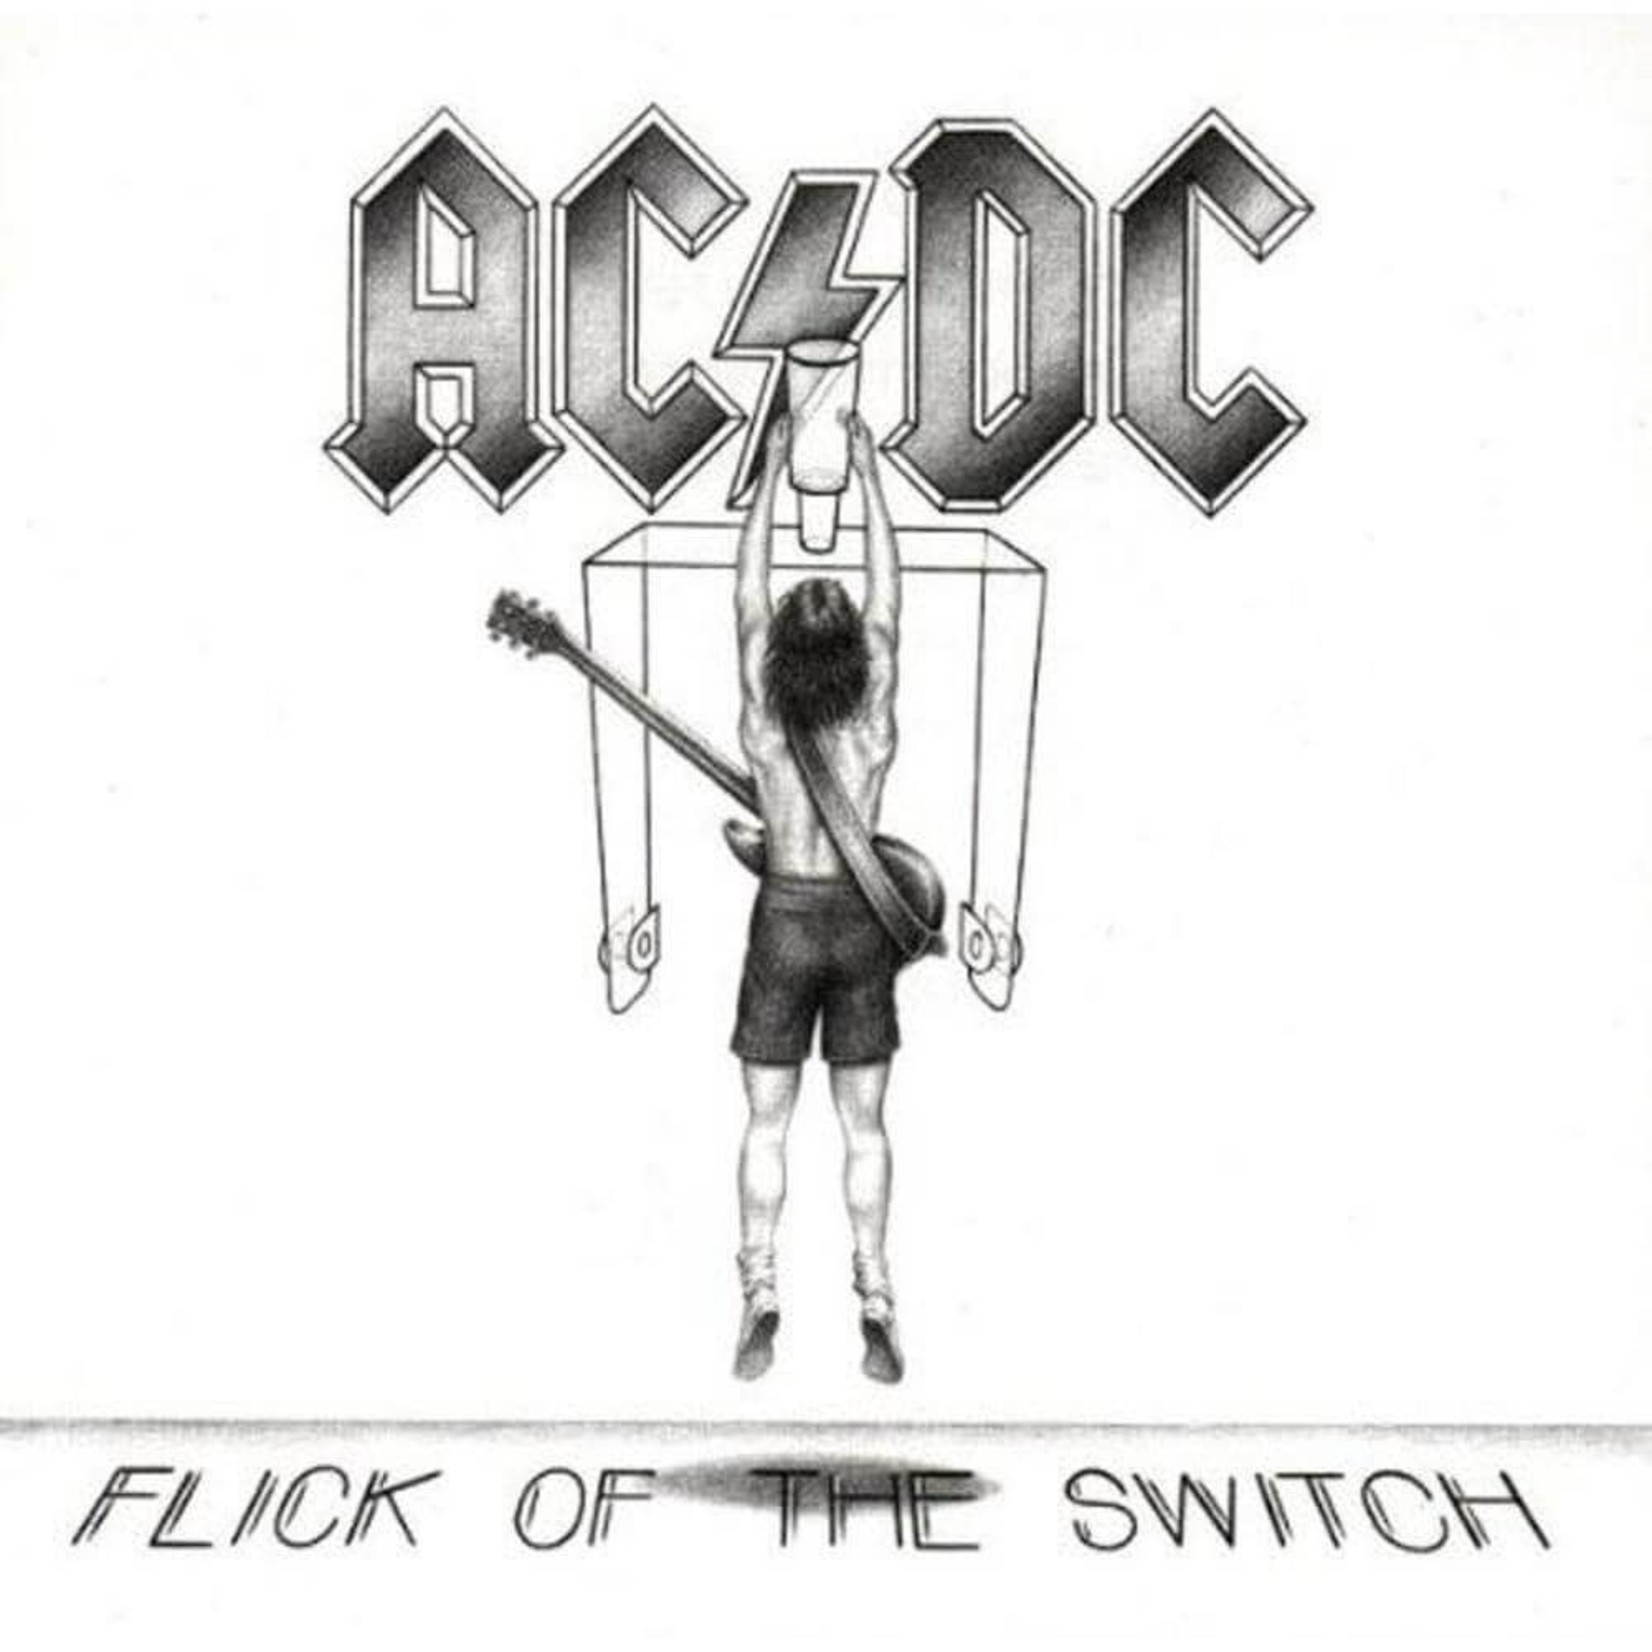 [Vintage] AC/DC - Flick of the Switch